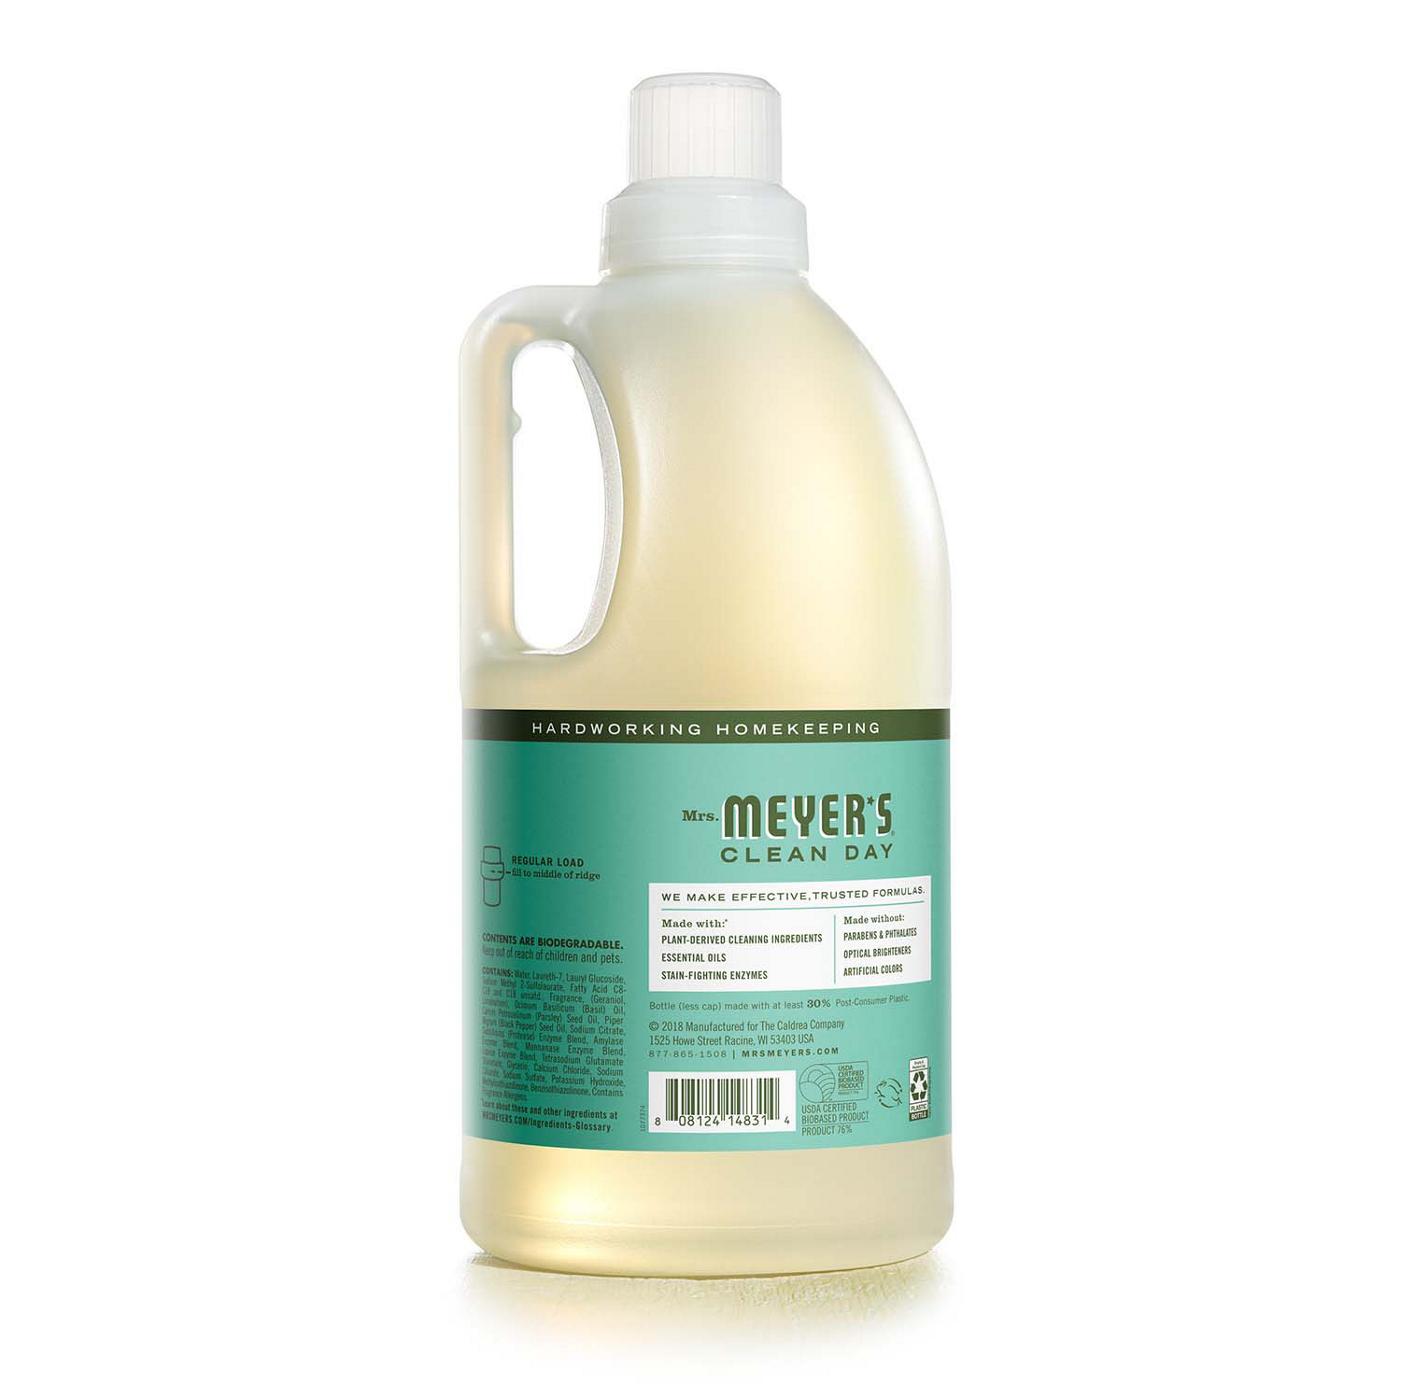 Mrs. Meyer's Clean Day Basil Scent Concentrated Laundry Detergent, 64 Loads; image 3 of 5